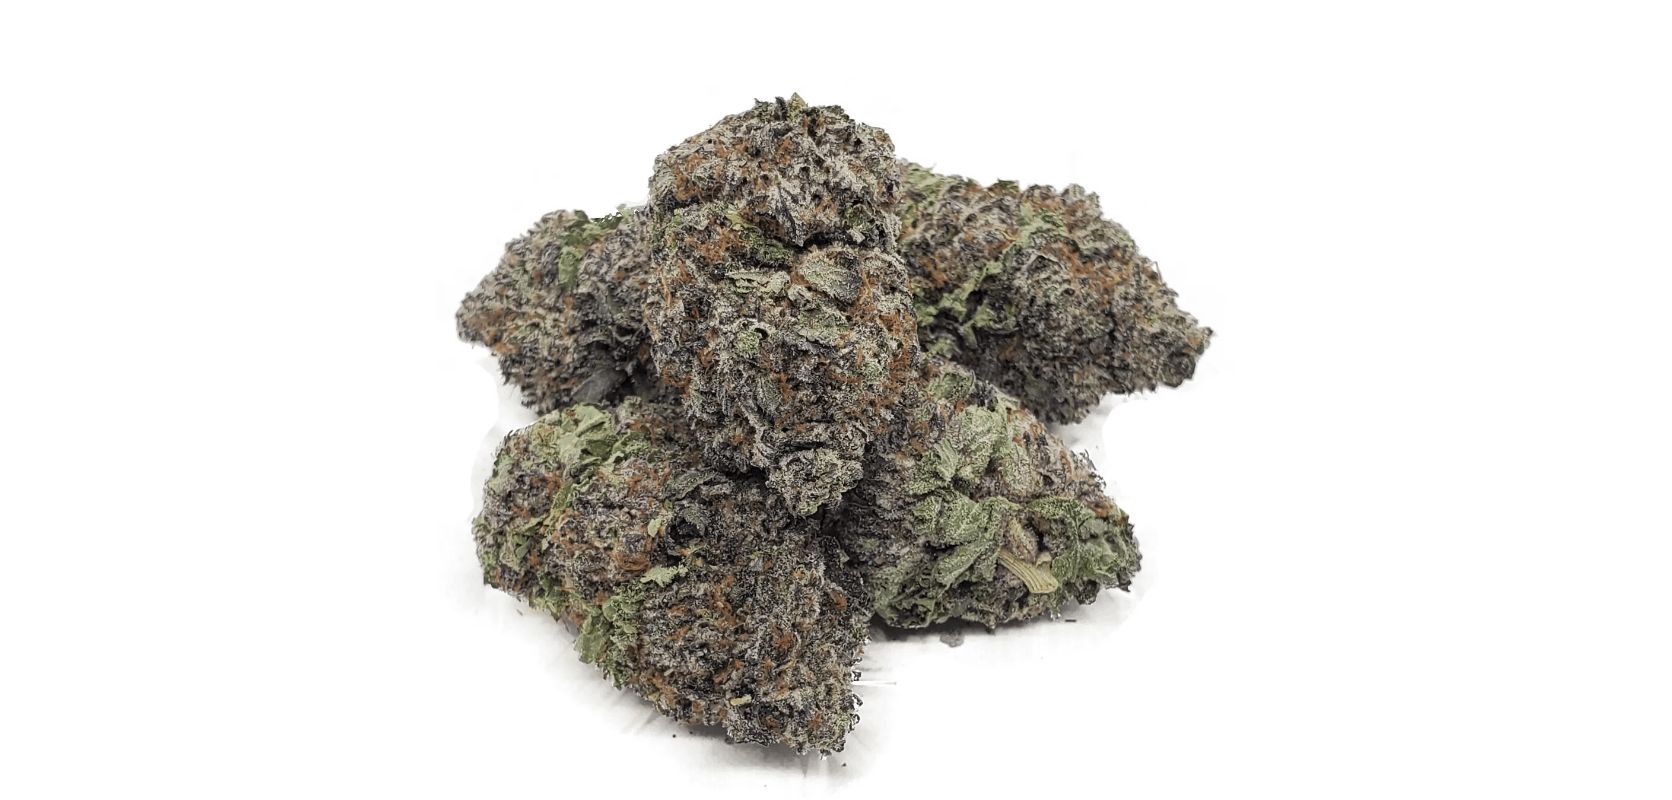 The Black Diamond has a distinctive aroma that is sweet, earthy, and woody, similar to the infamous Fruity Pebbles strain.